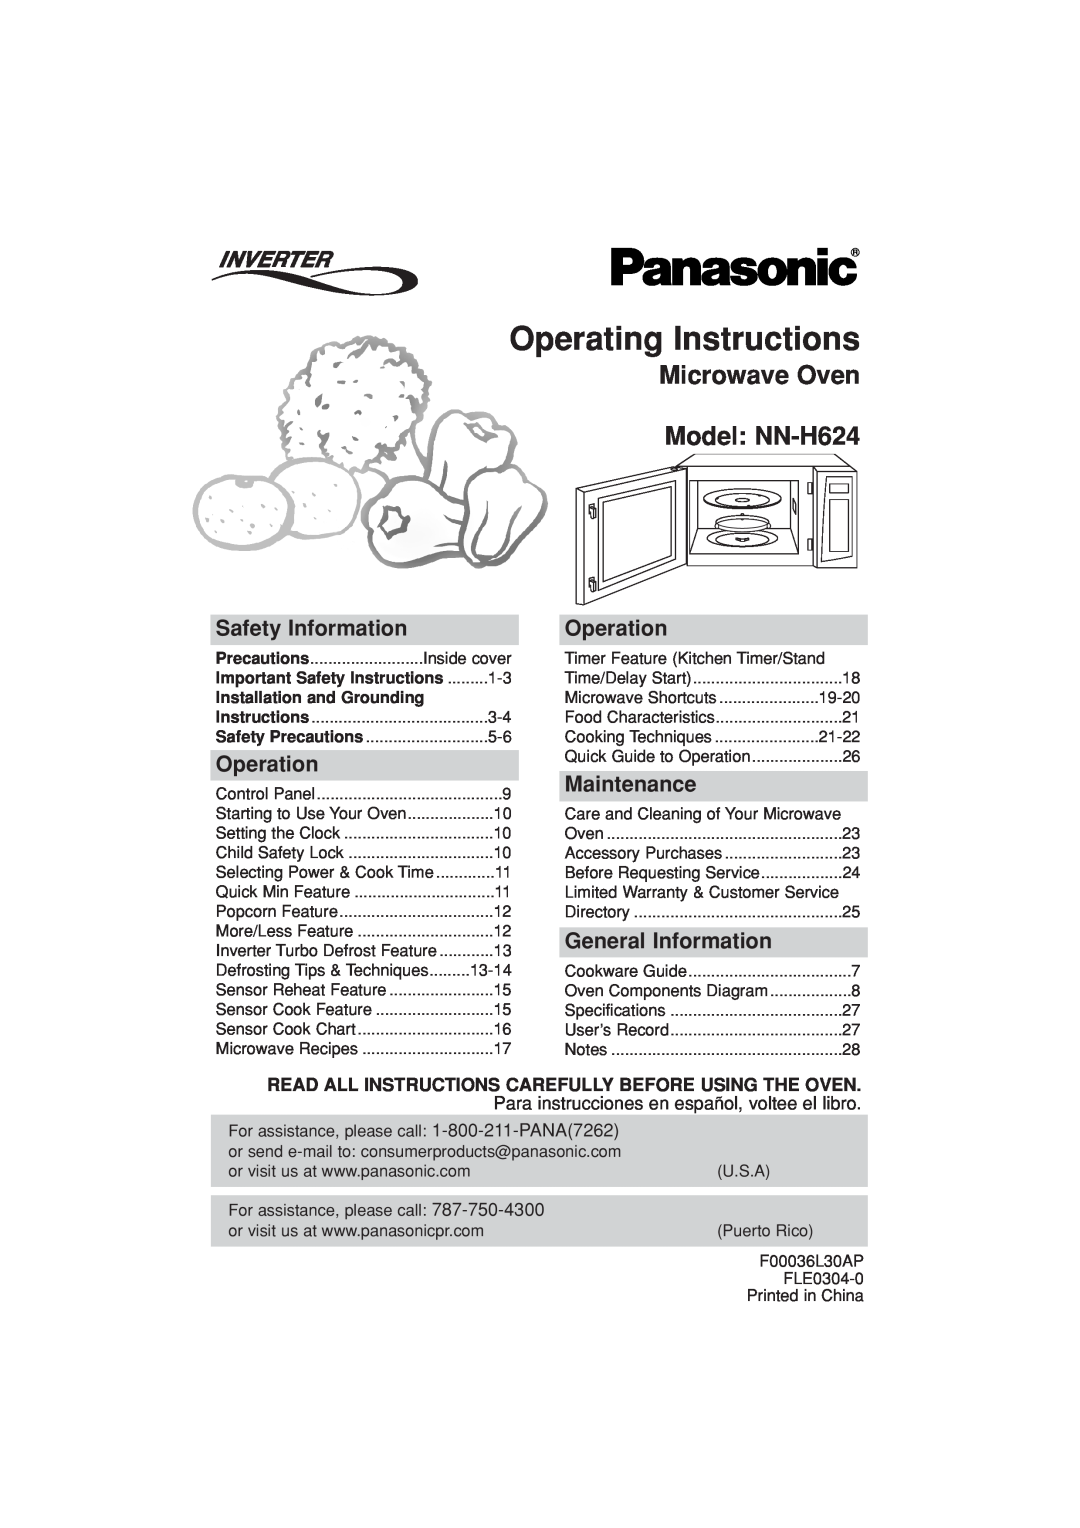 Panasonic operating instructions Operating Instructions, Microwave Oven Model NN-H624, Safety Information, Operation 